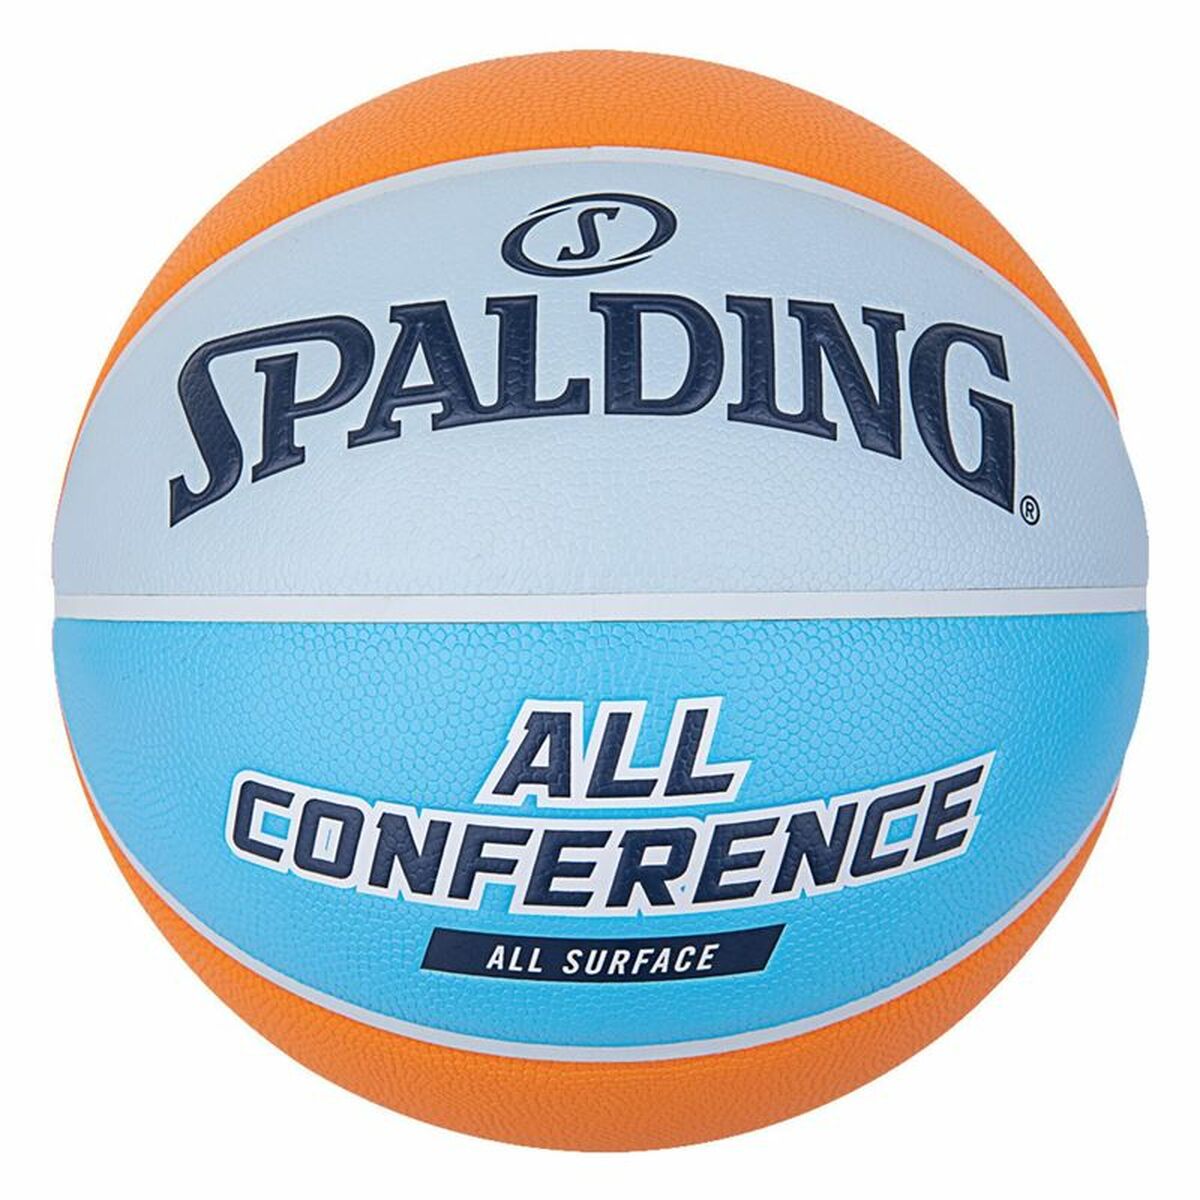 Spalding Basketball All Conference Orange Blau 5 All Surfaces